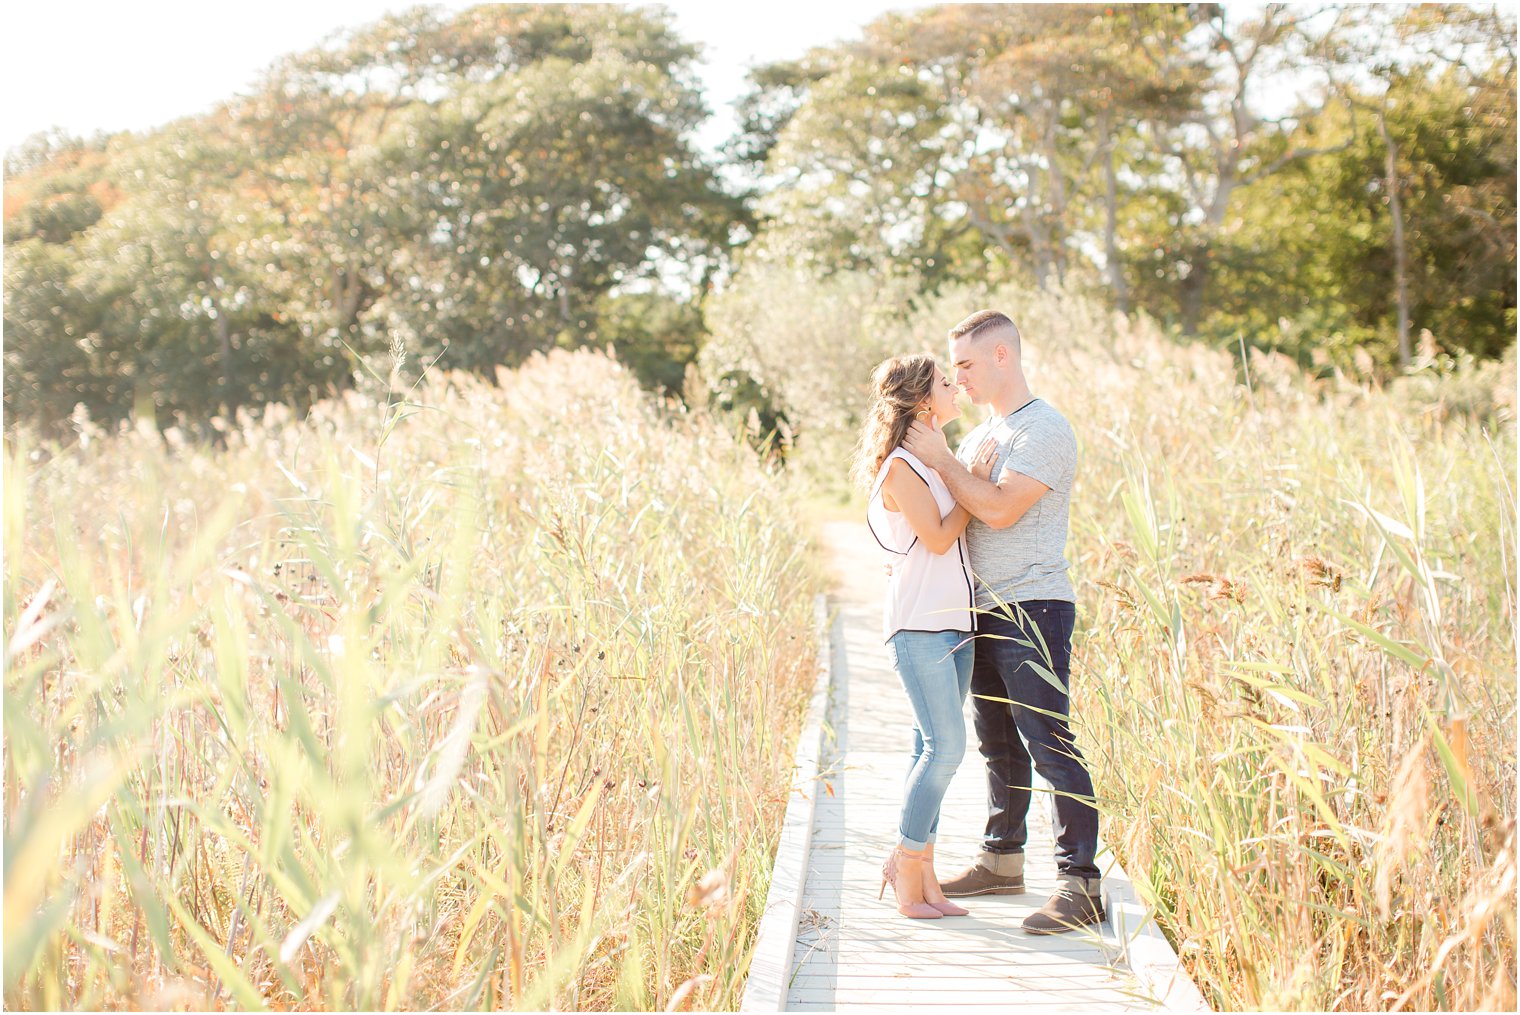 Romantic photo of bride and groom in Cape May, NJ | Photos by Idalia Photography